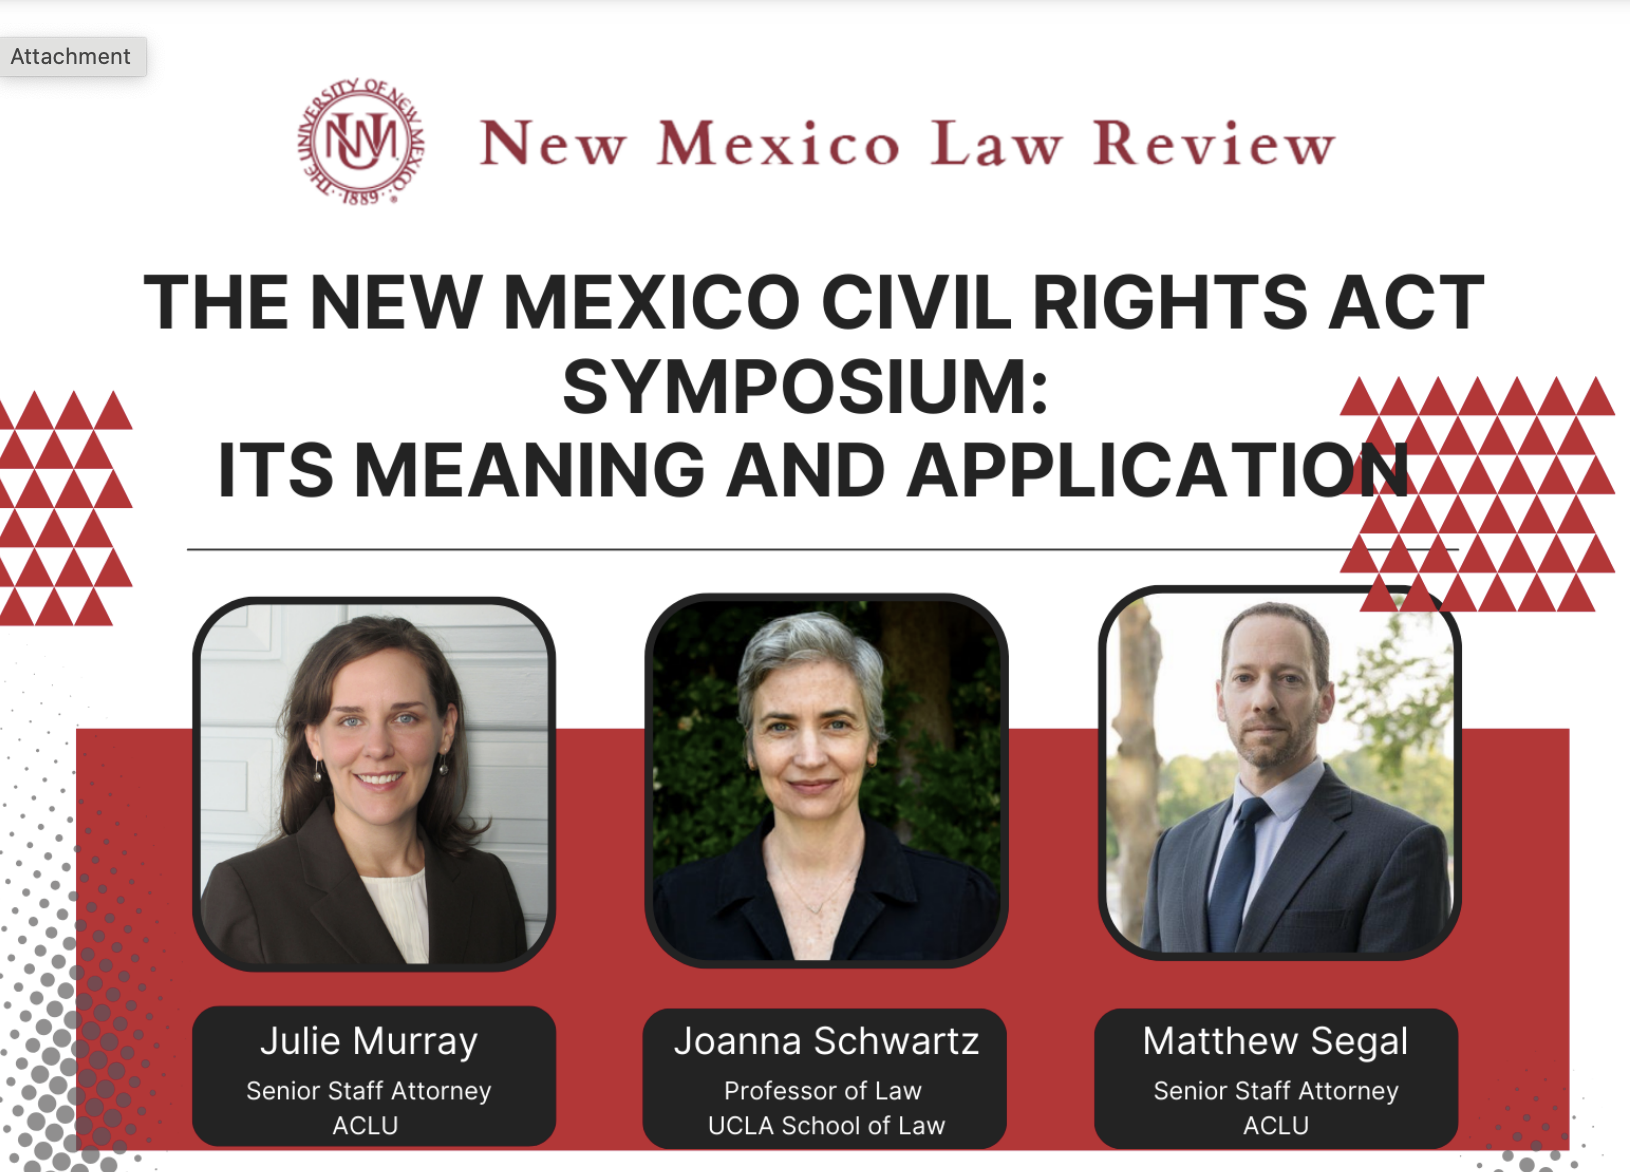 brochure slide with details about the new mexico civil rights act symposium